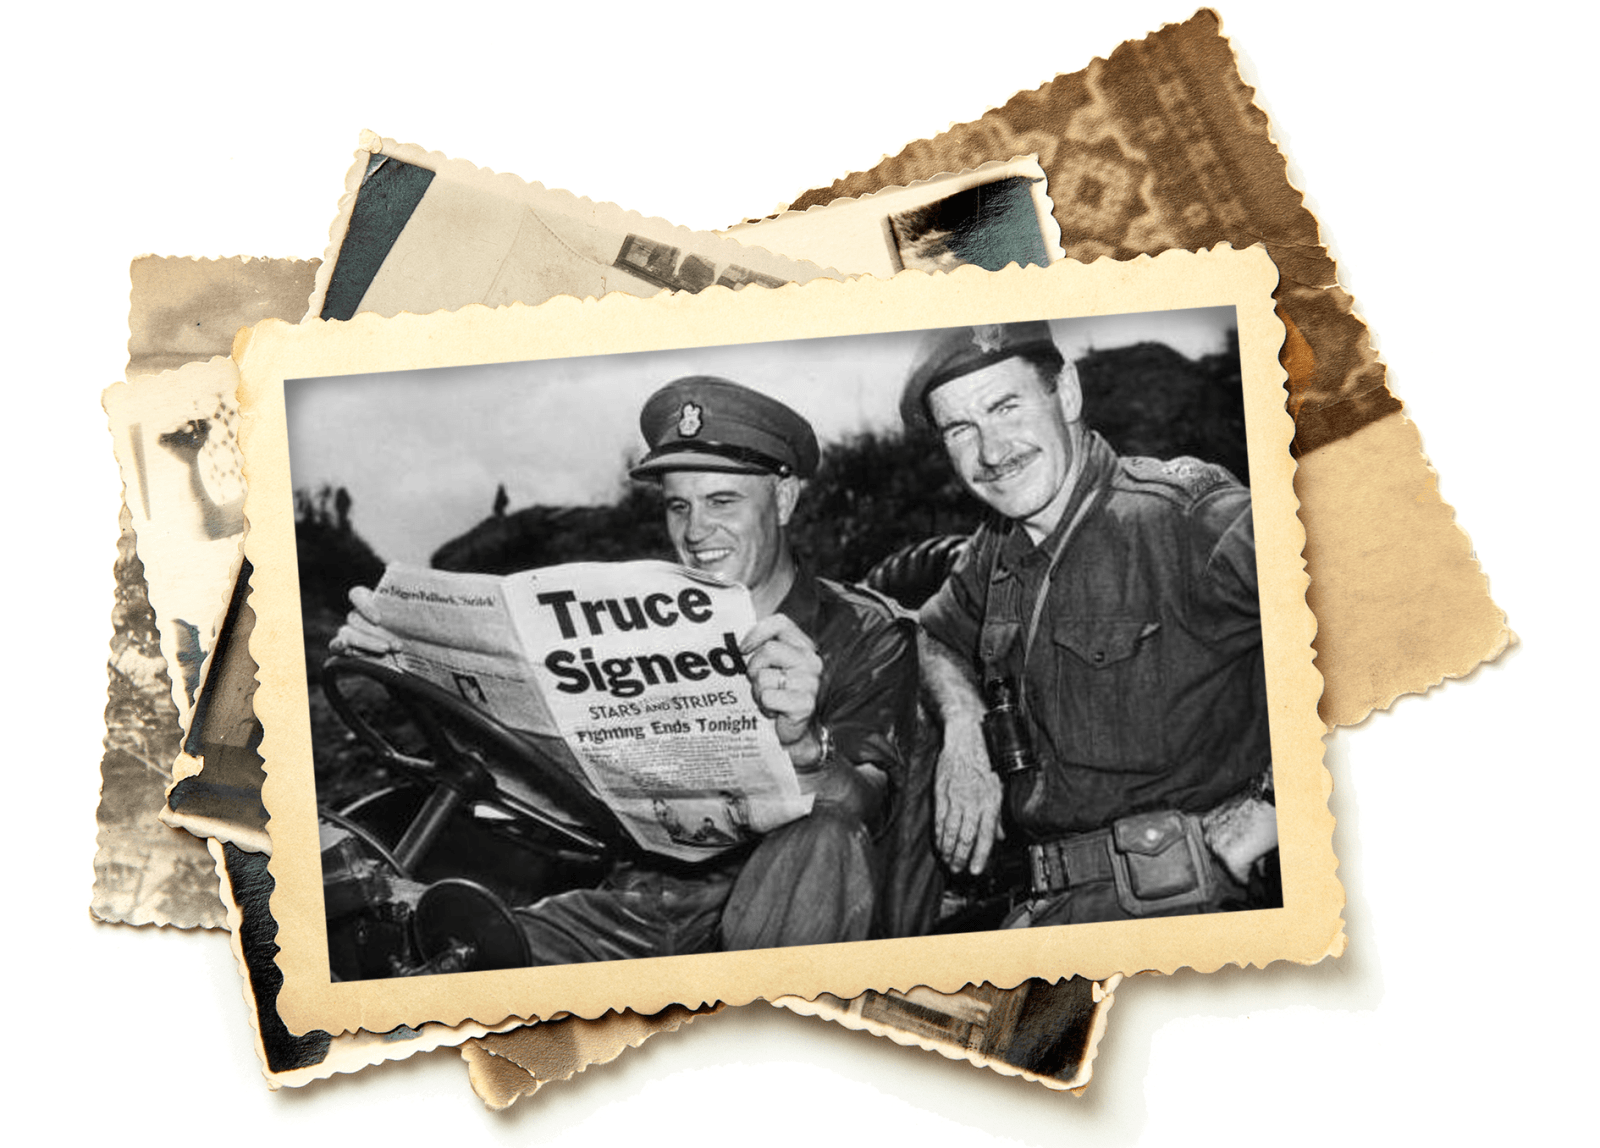 A black and white image of two men in military uniforms. The one of the left is reading a newspaper with a bold headline “Truce Signed” while the man on the left, Colonel K. L. Campbell, smiles while looking at the camera.